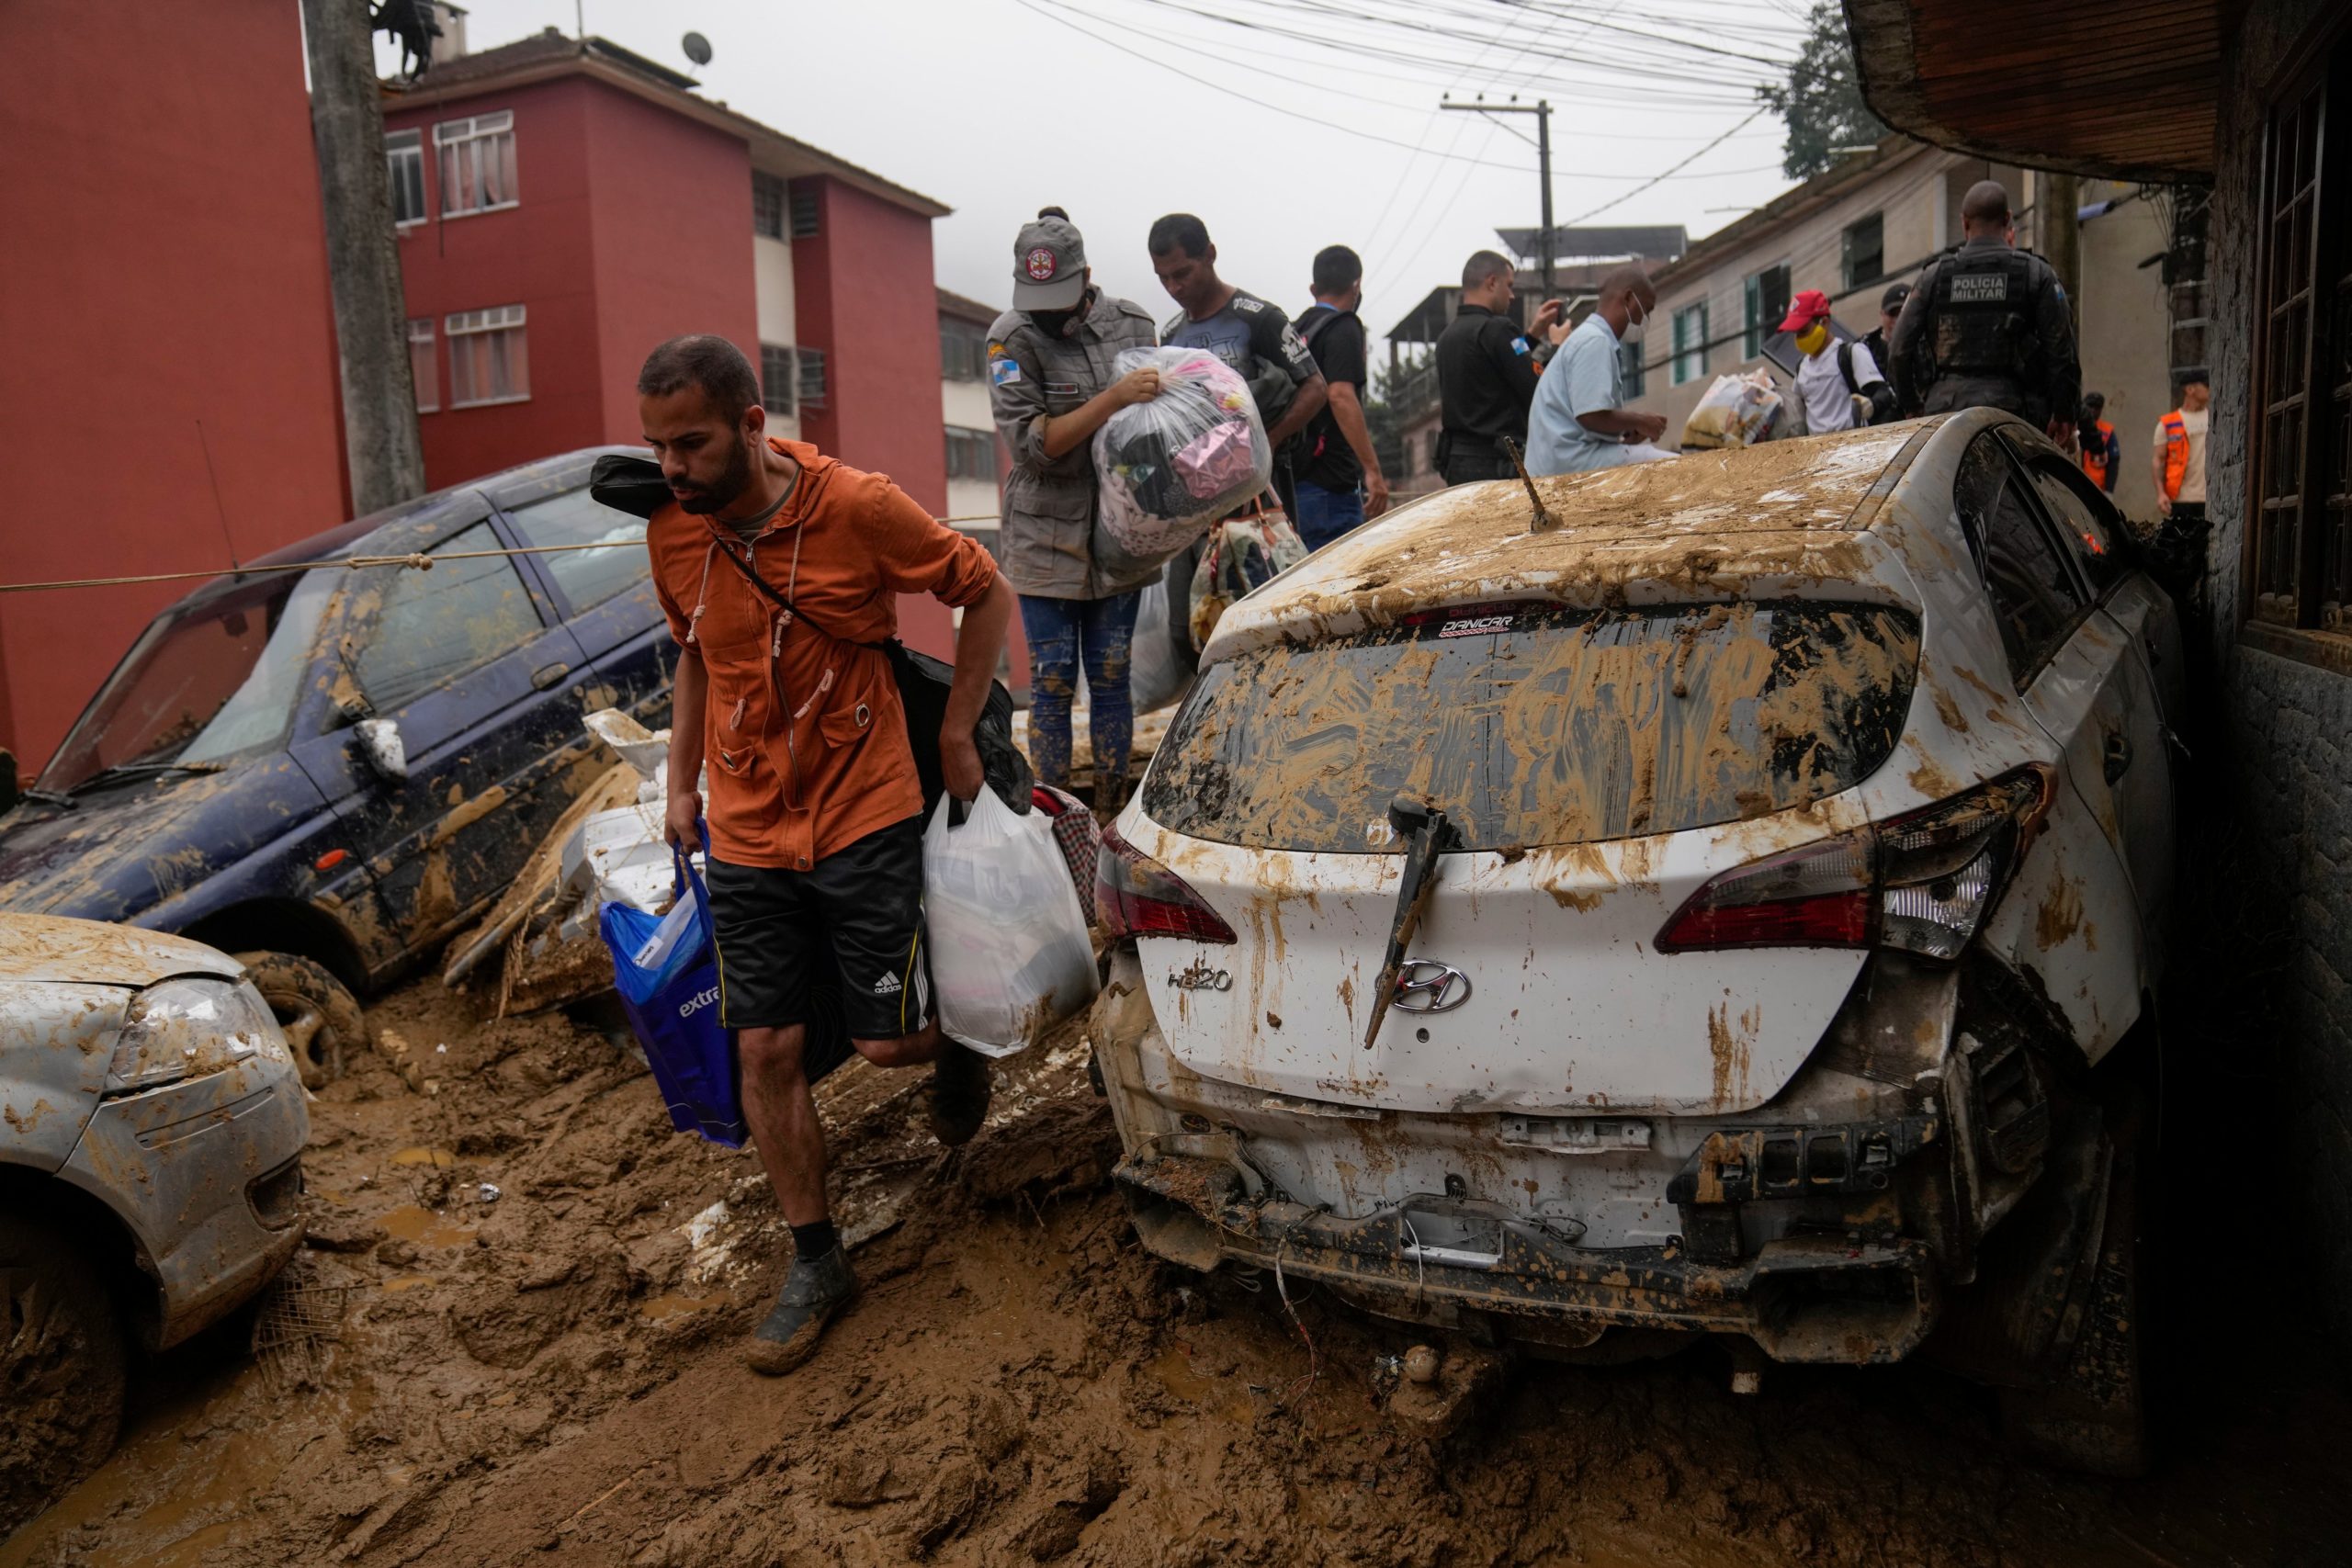 Residents recover belongs from their homes destroyed by mudslides. (Photo: Silvia Izquierdo, AP)